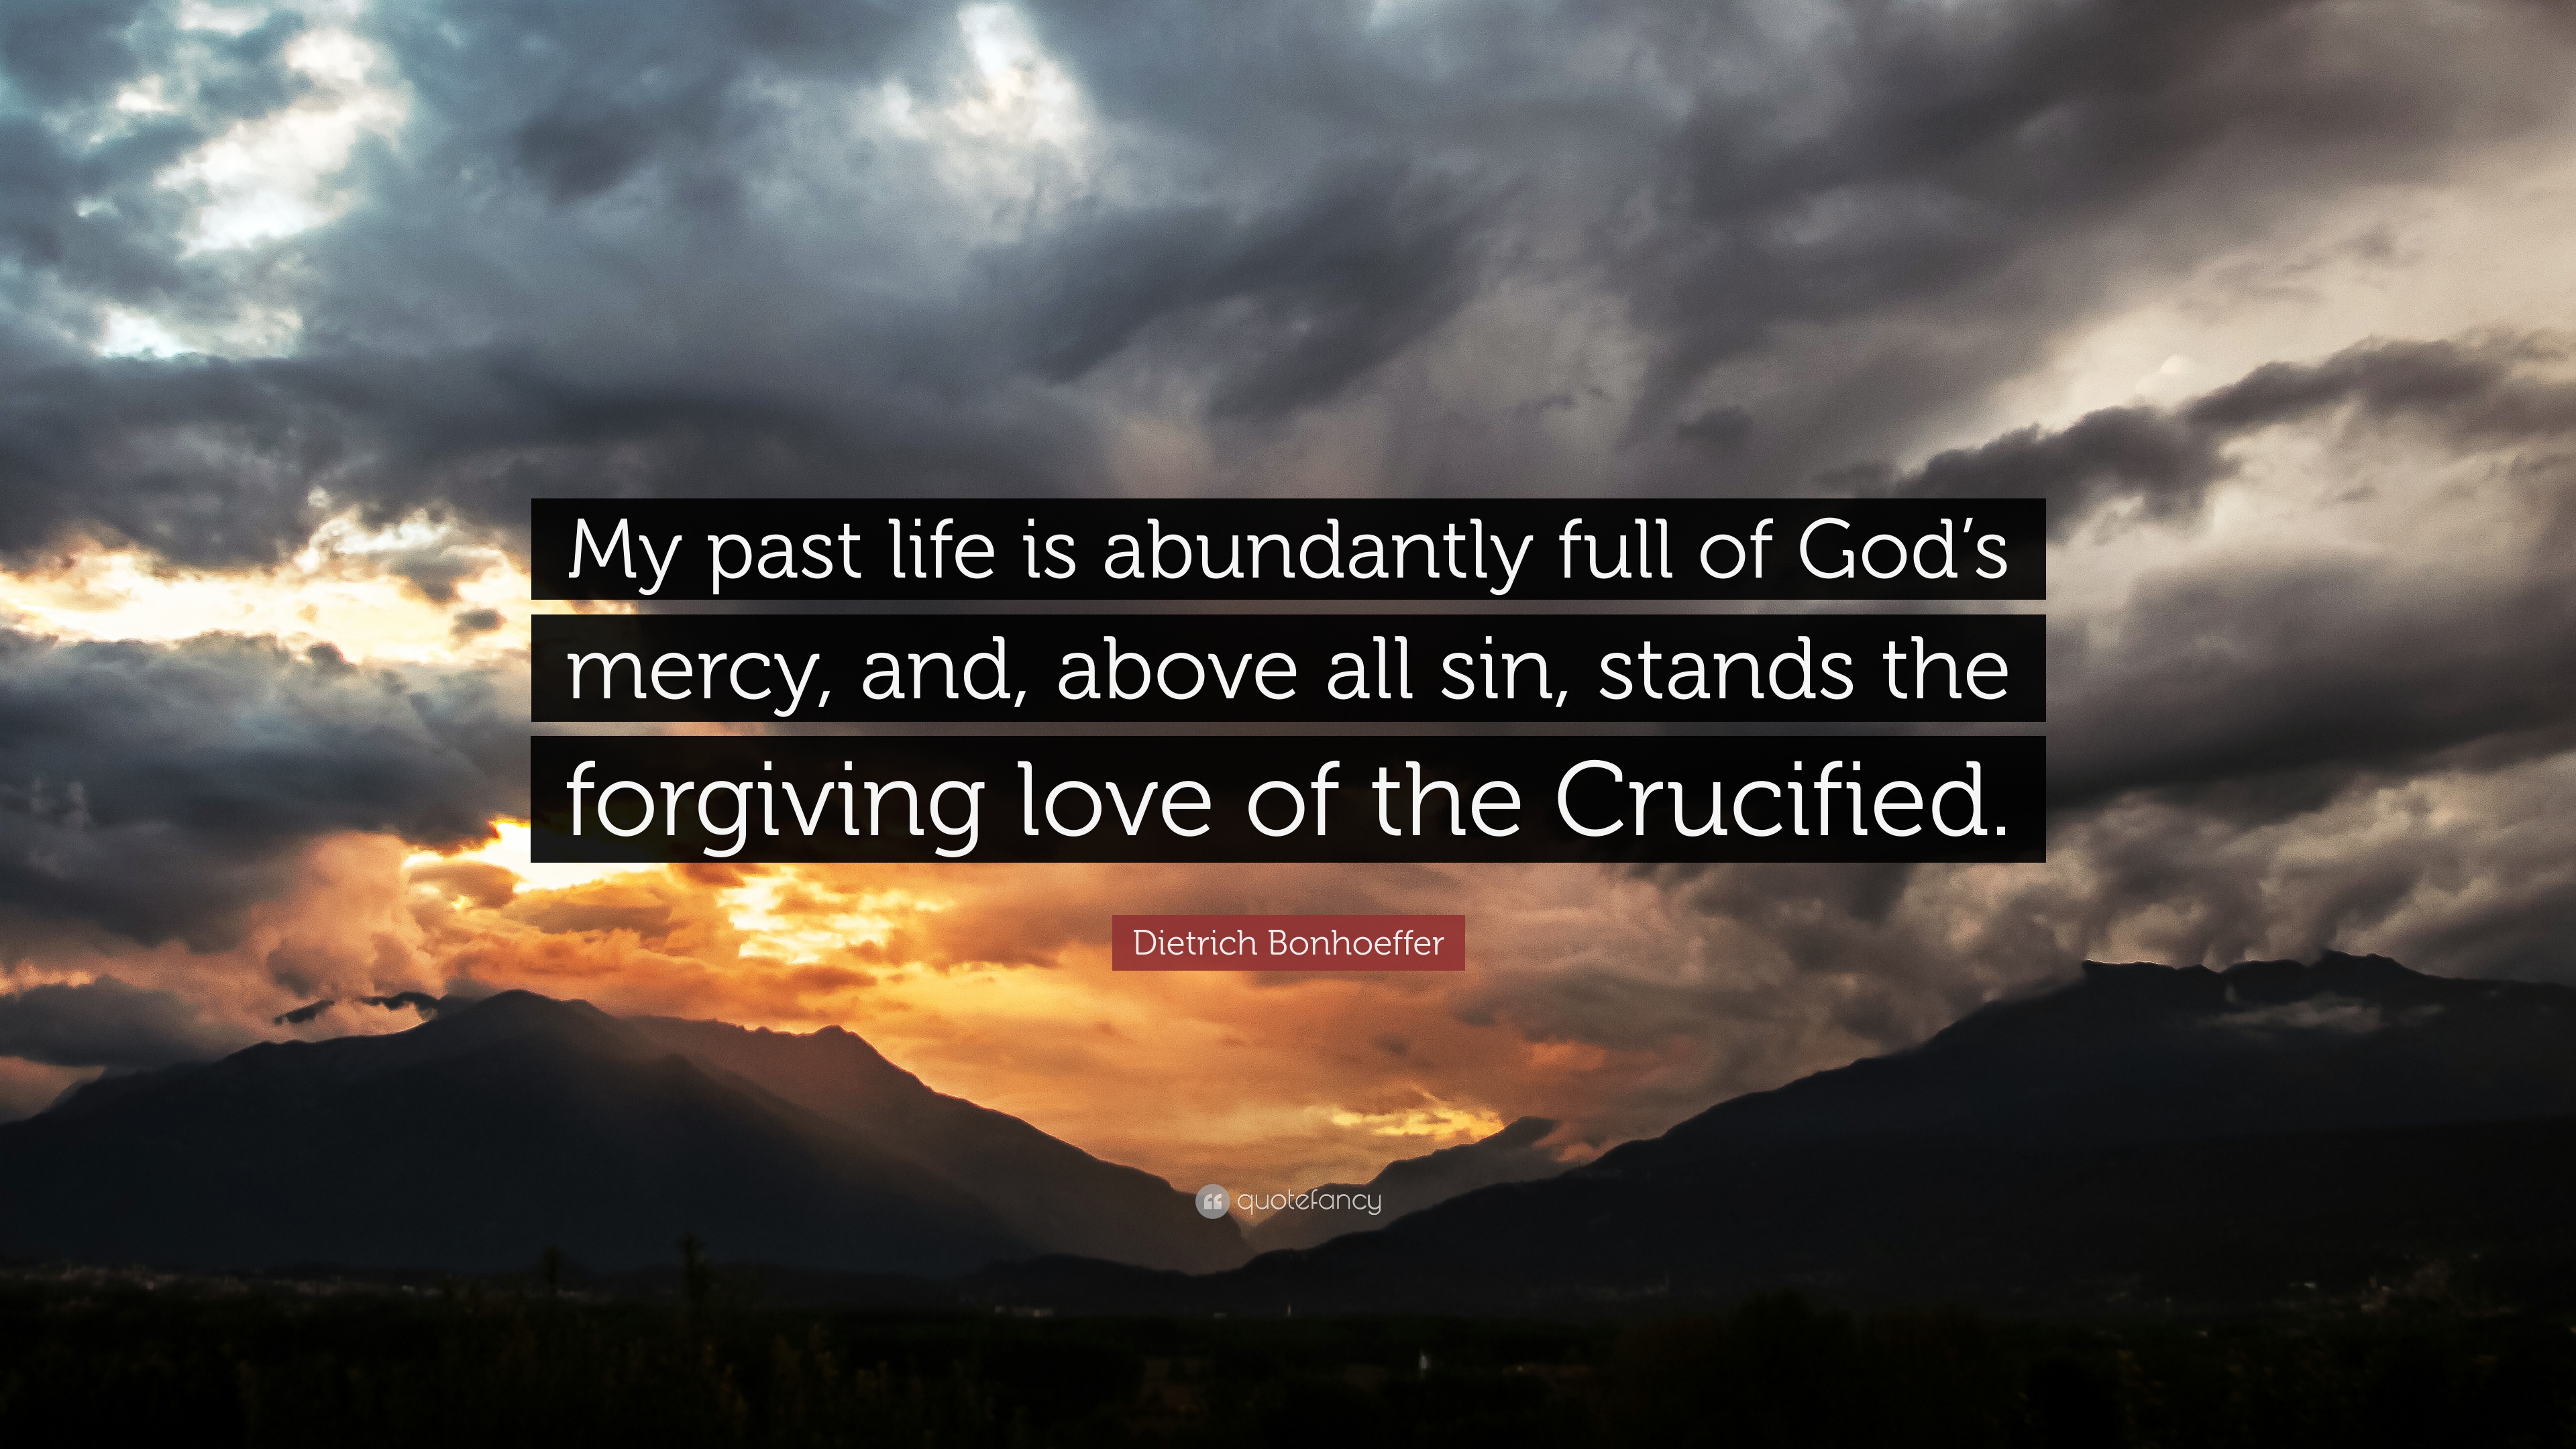 Dietrich Bonhoeffer Quote “My past life is abundantly full of God s mercy and